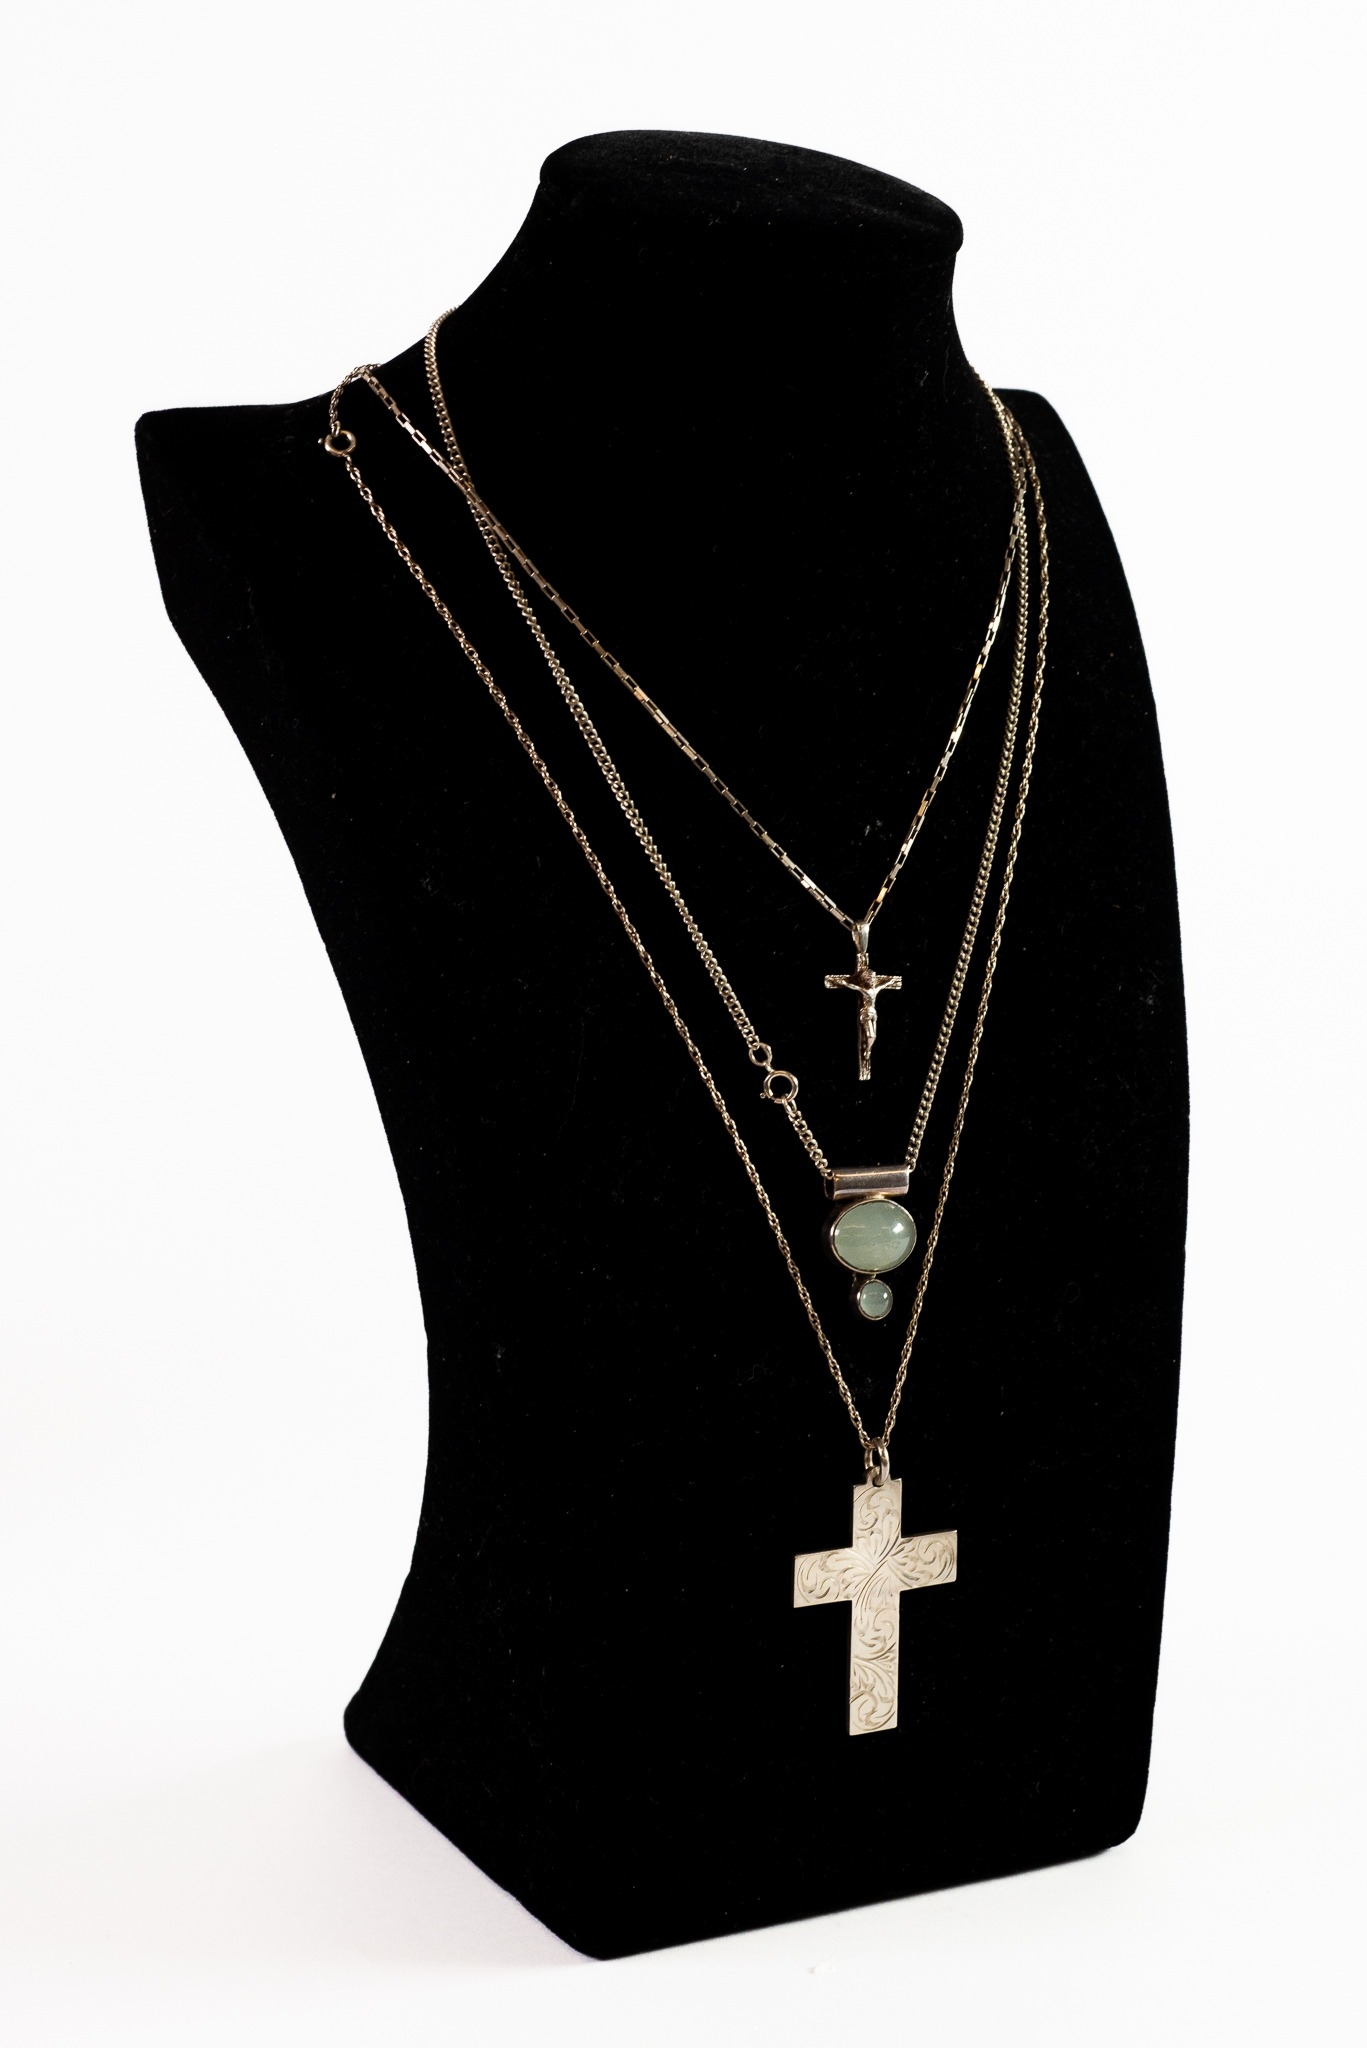 THREE SILVER CHAIN NECKLACES, one with engraved cross pendant, one with a crucifix pendant adn the